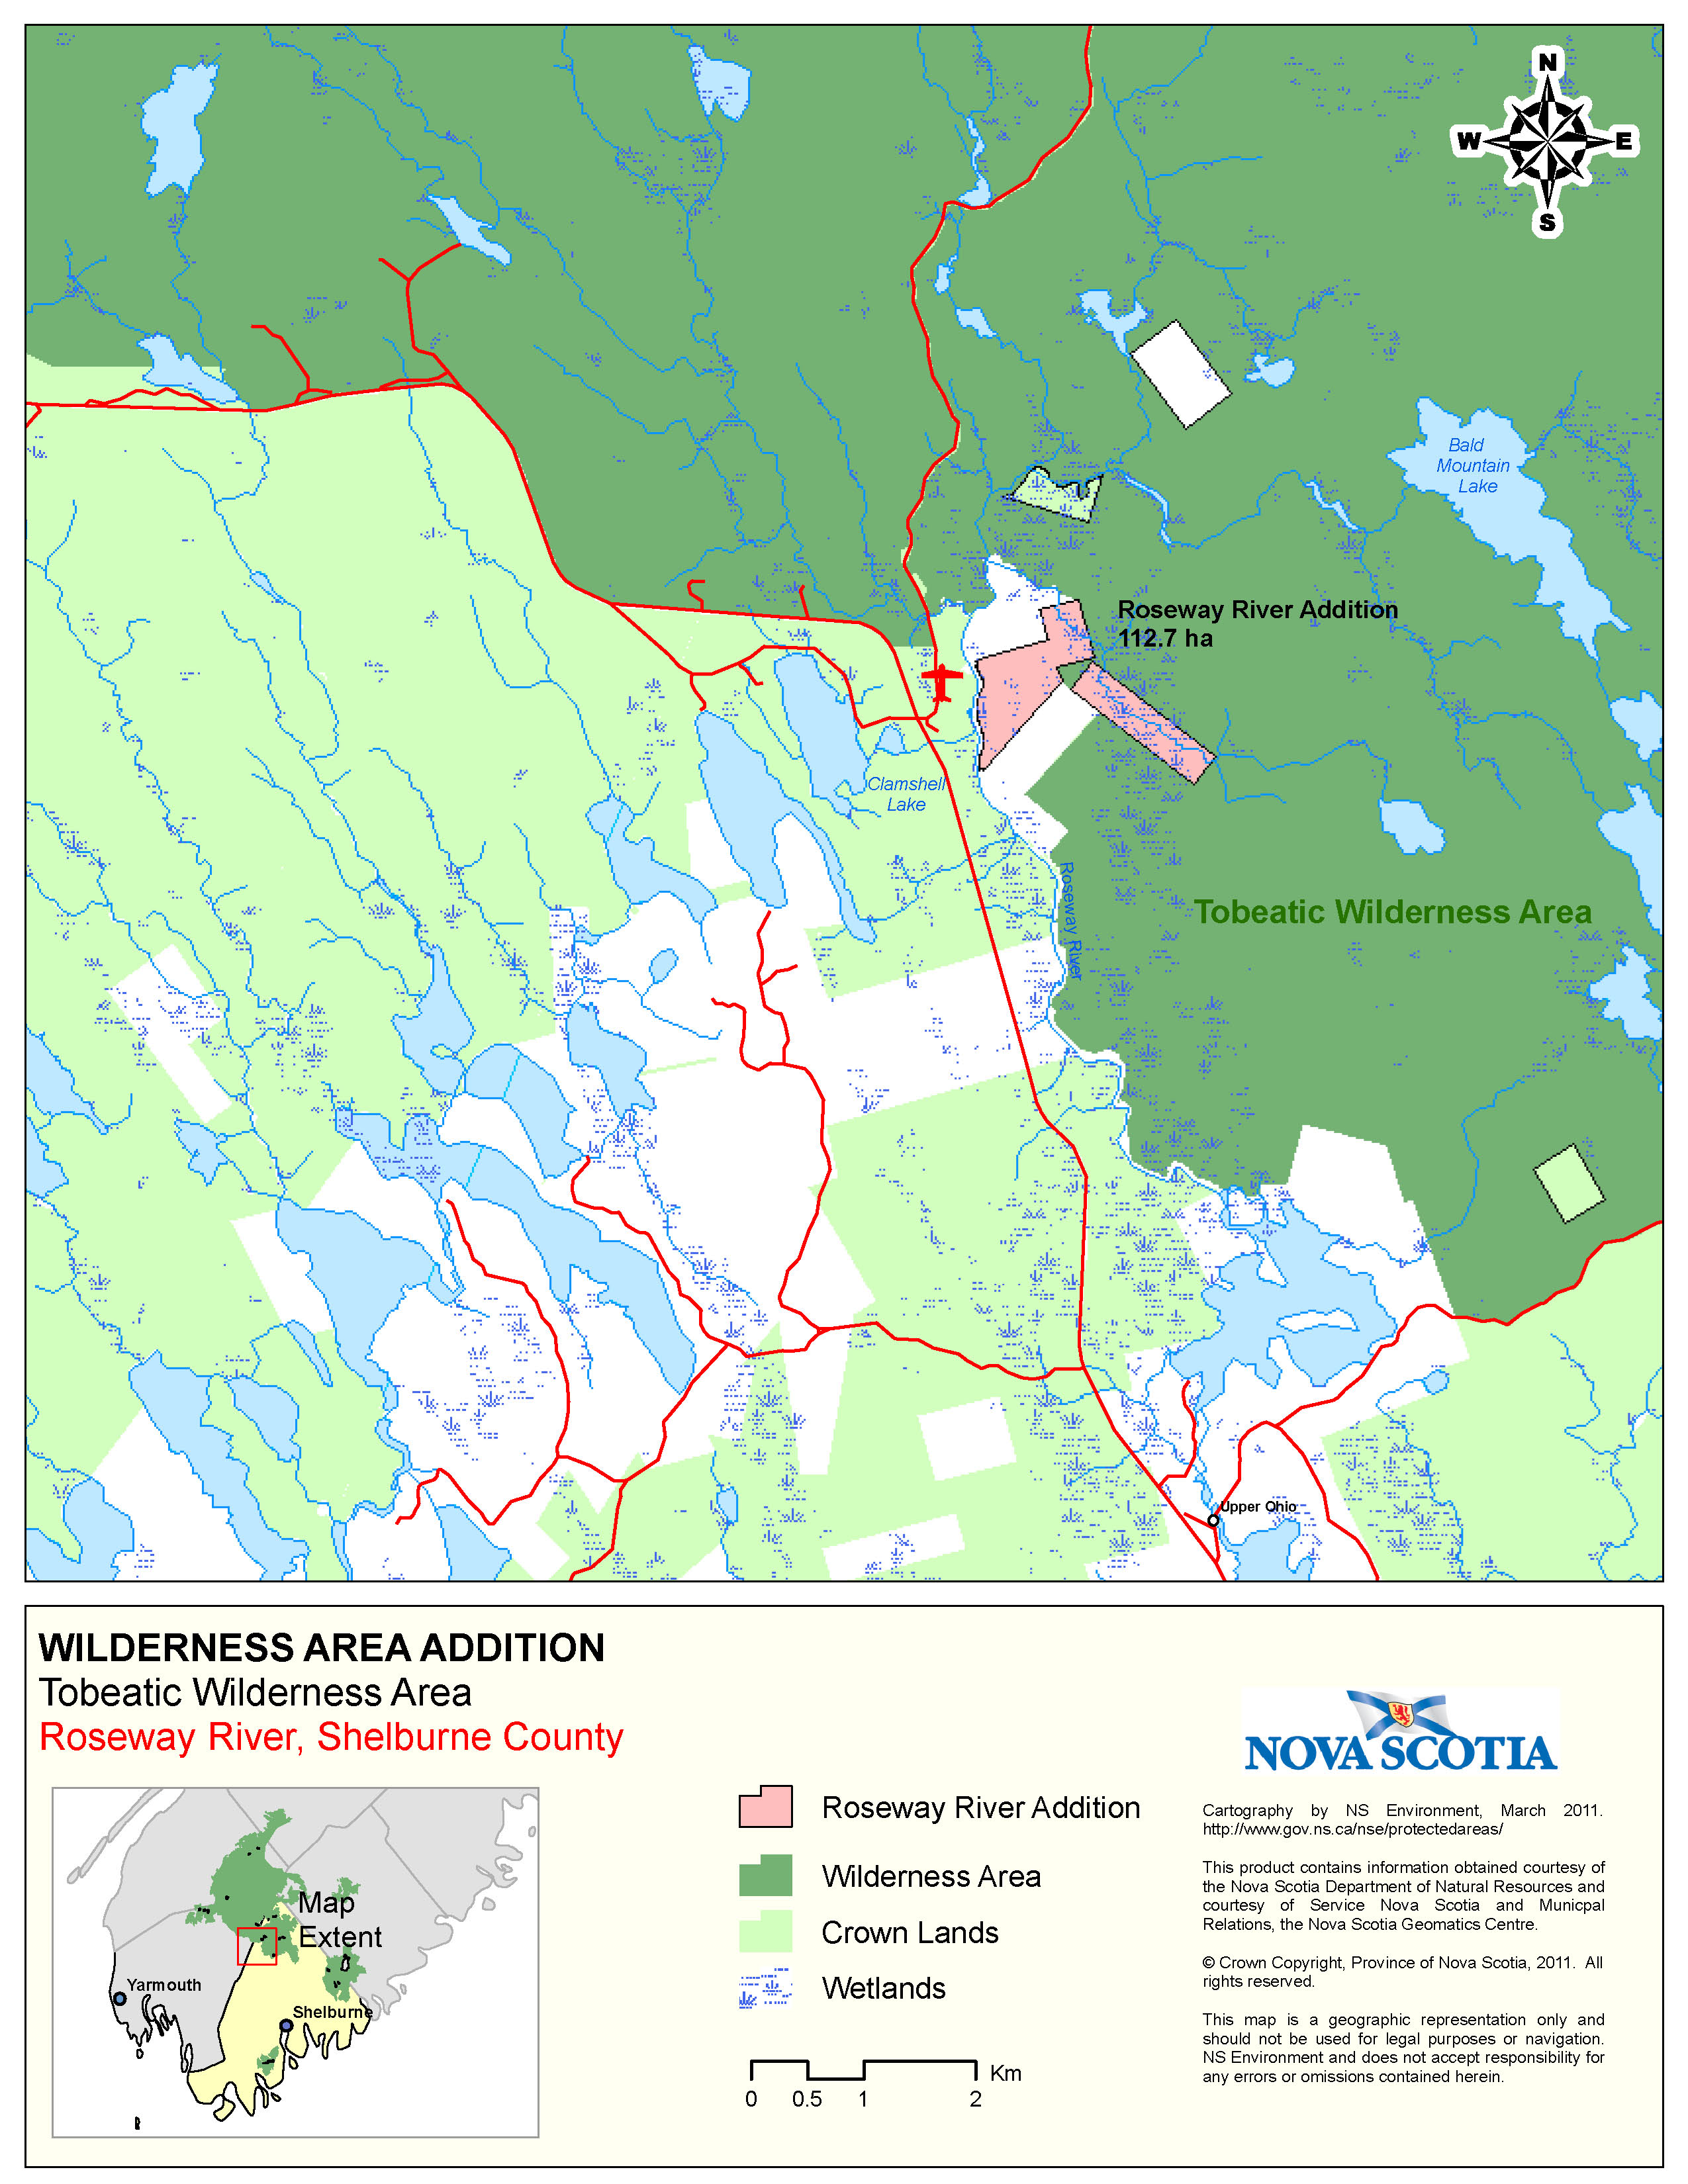 Approximate Boundaries of Crown Land at Roseway River, Shelburne County